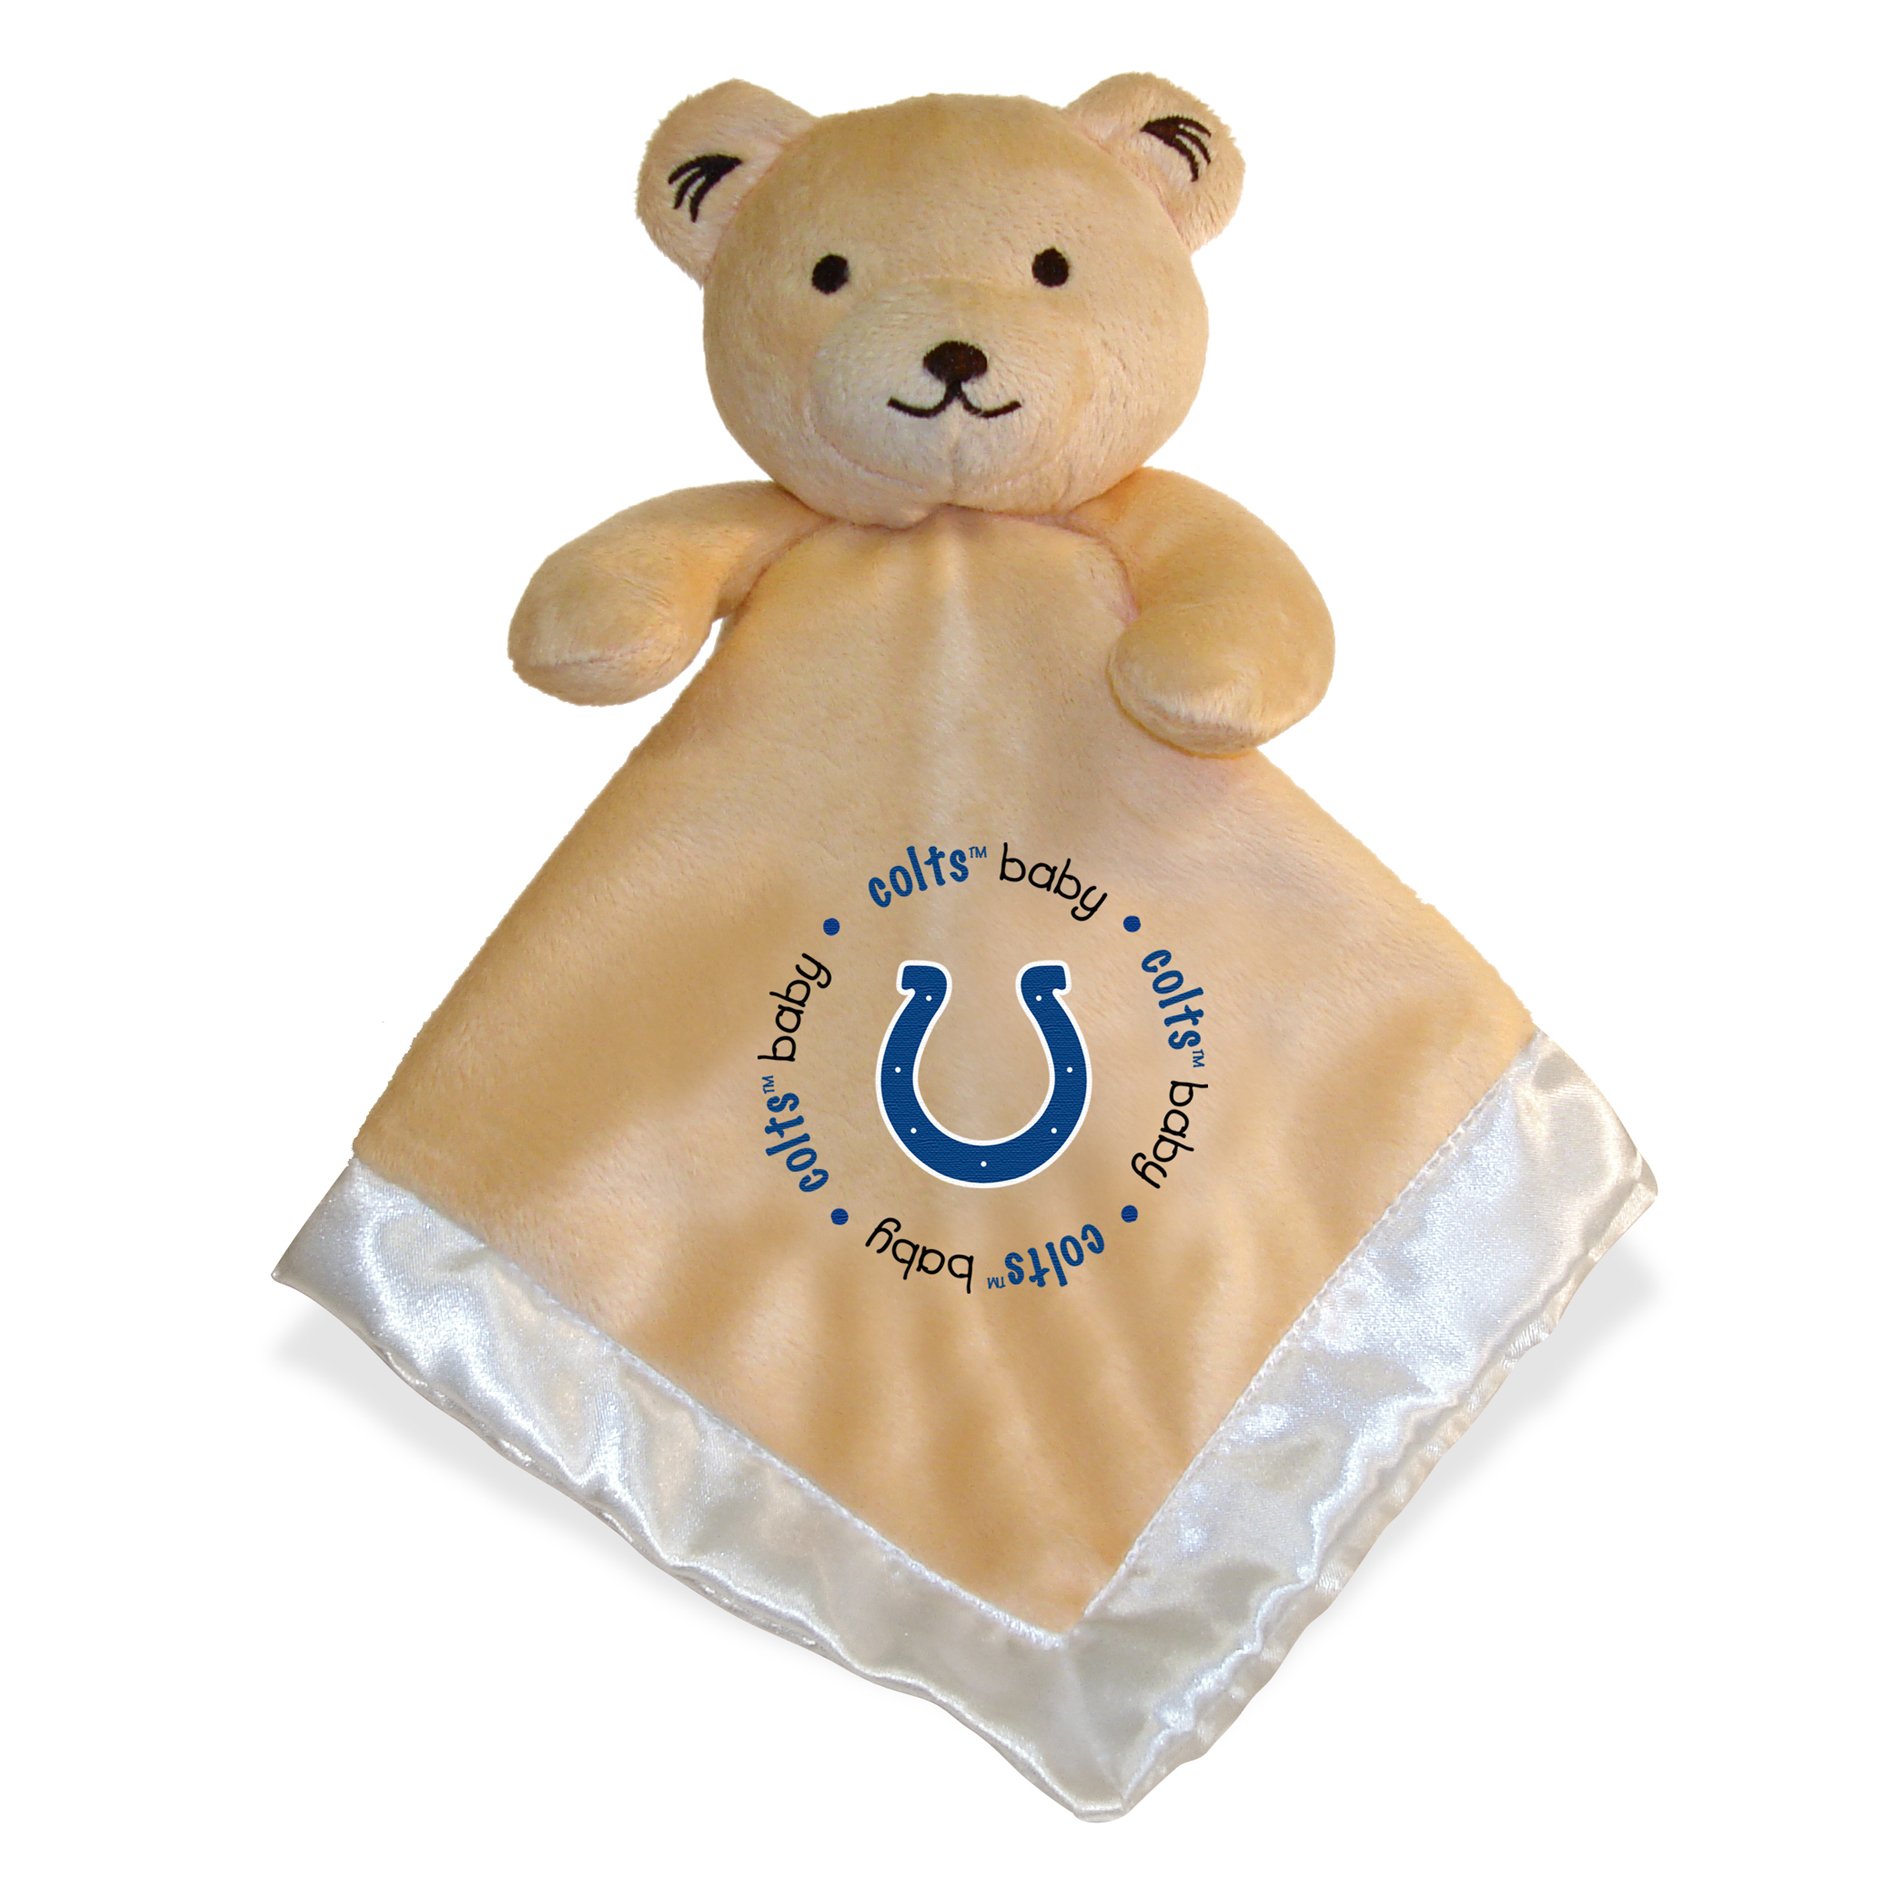 0812799018087 - NFL INDIANAPOLIS COLTS SNUGGLE BEAR